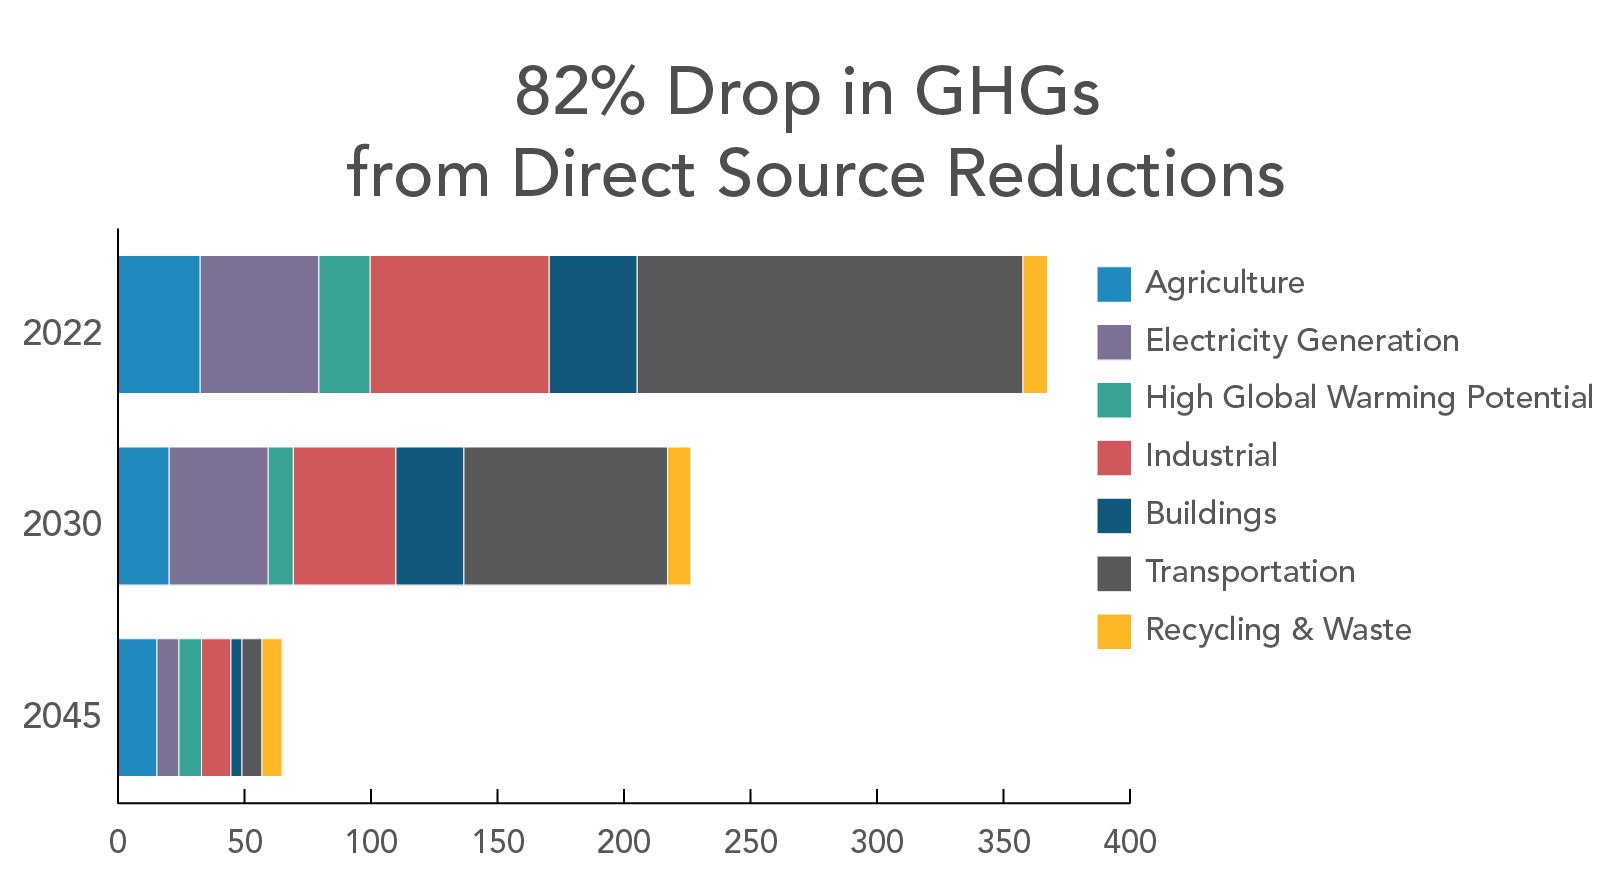 Bar chart showing 82% Drop in GHGs from Direct Source Reductions